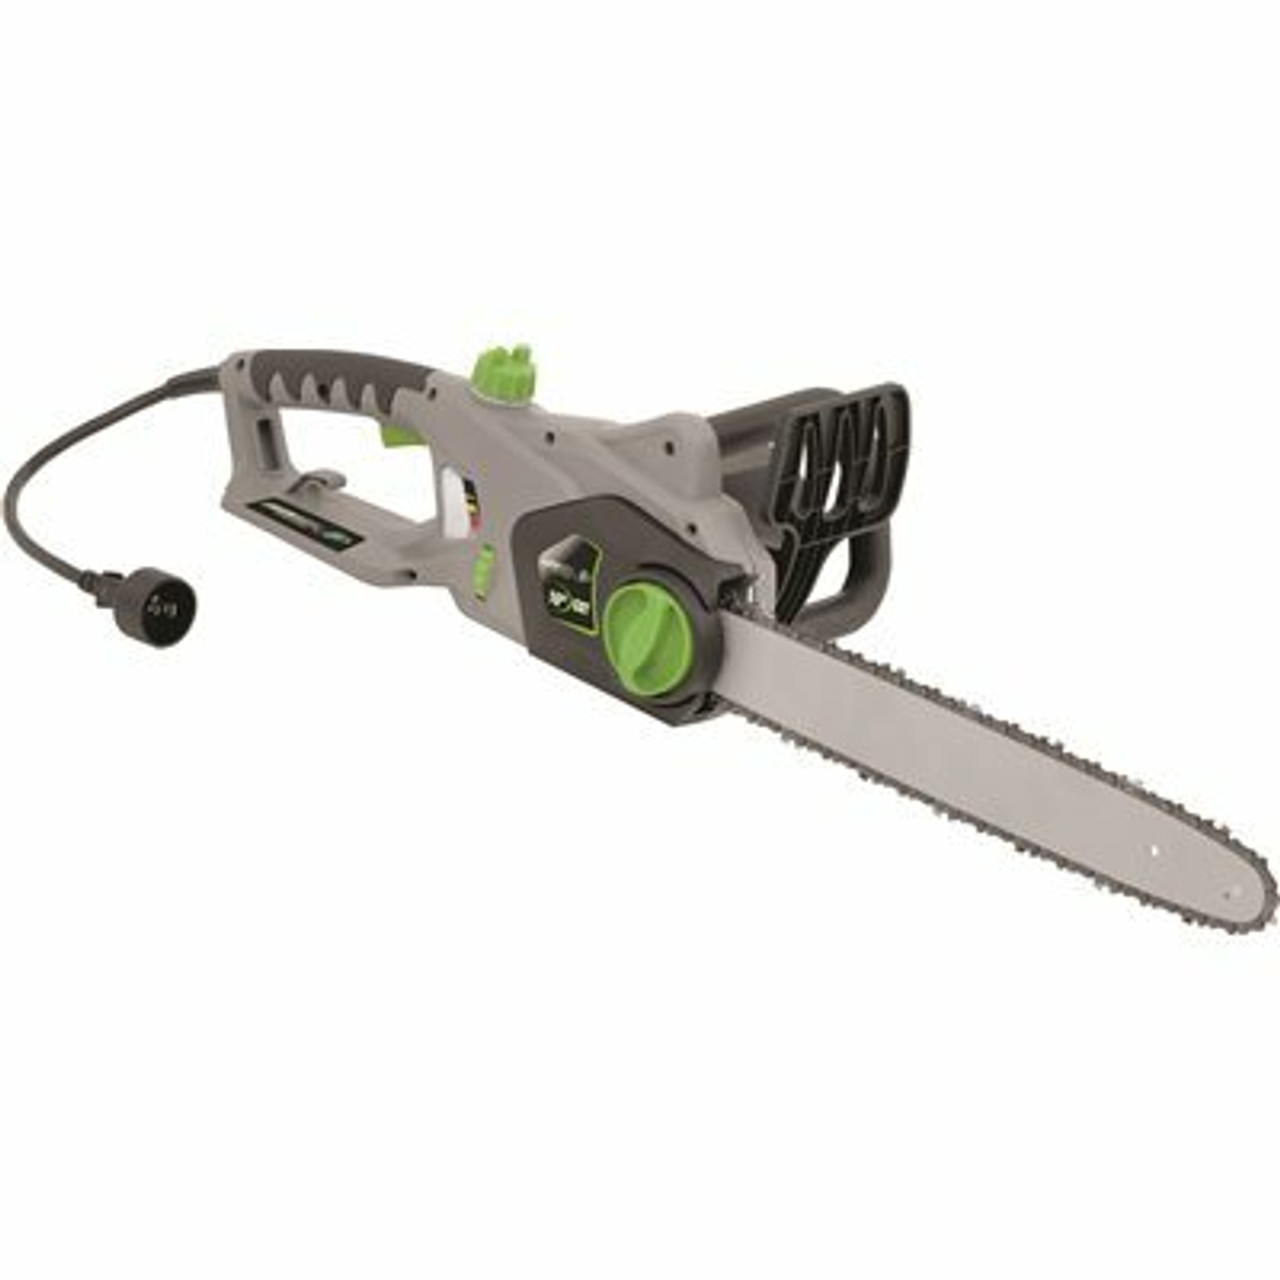 Earthwise 16 In. Electric Chainsaw